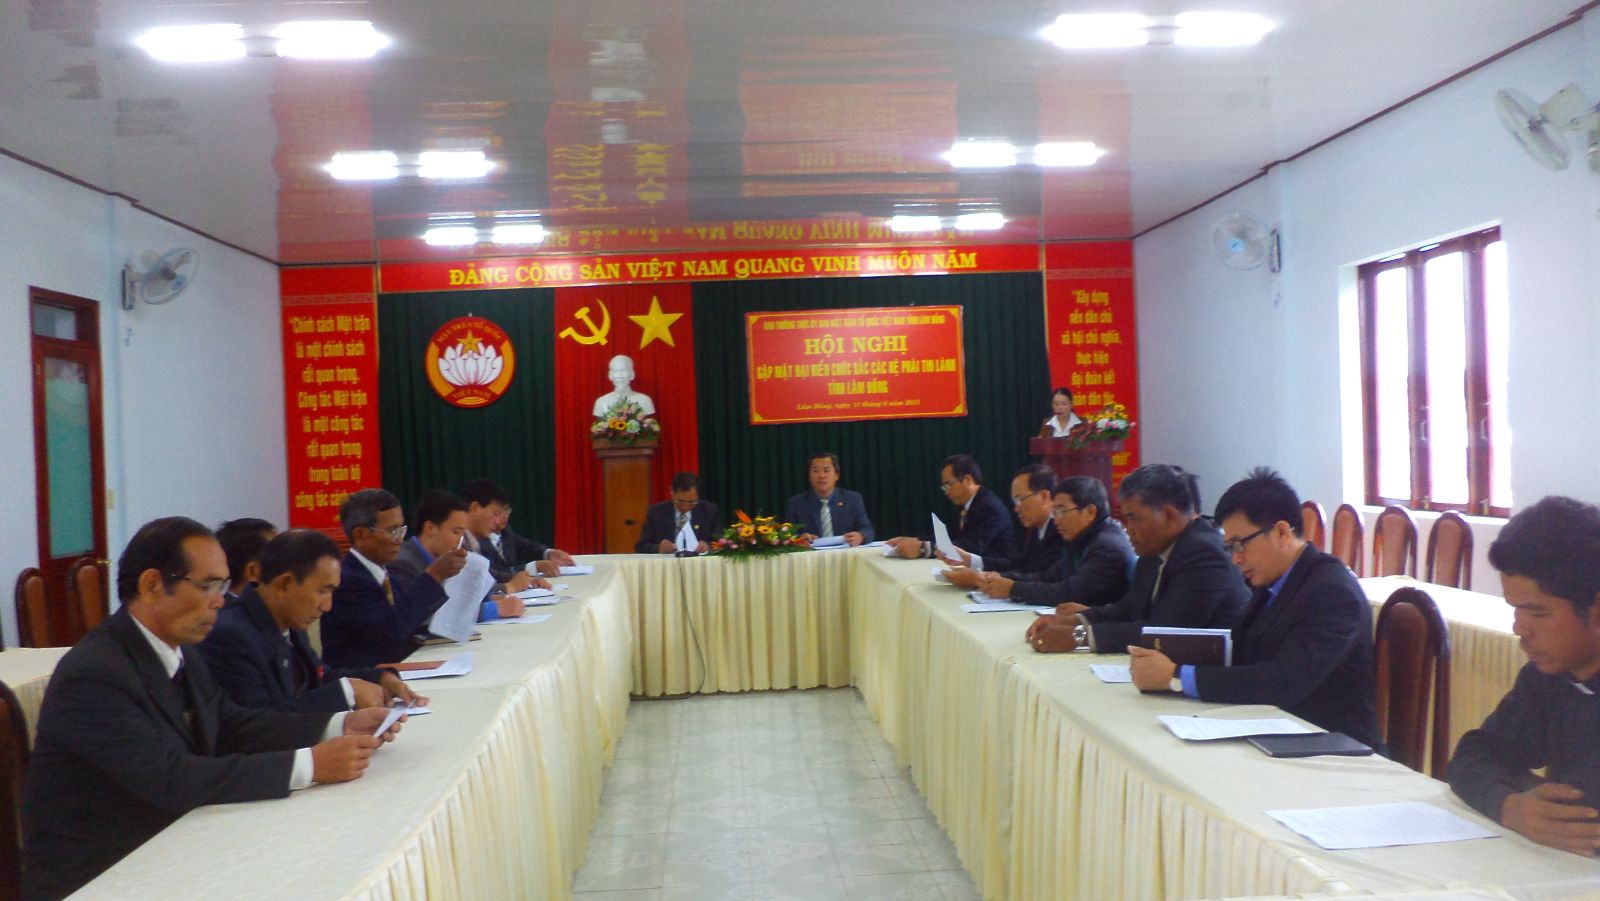 Lam Dong province: VFF holds meeting with Protestant denominations